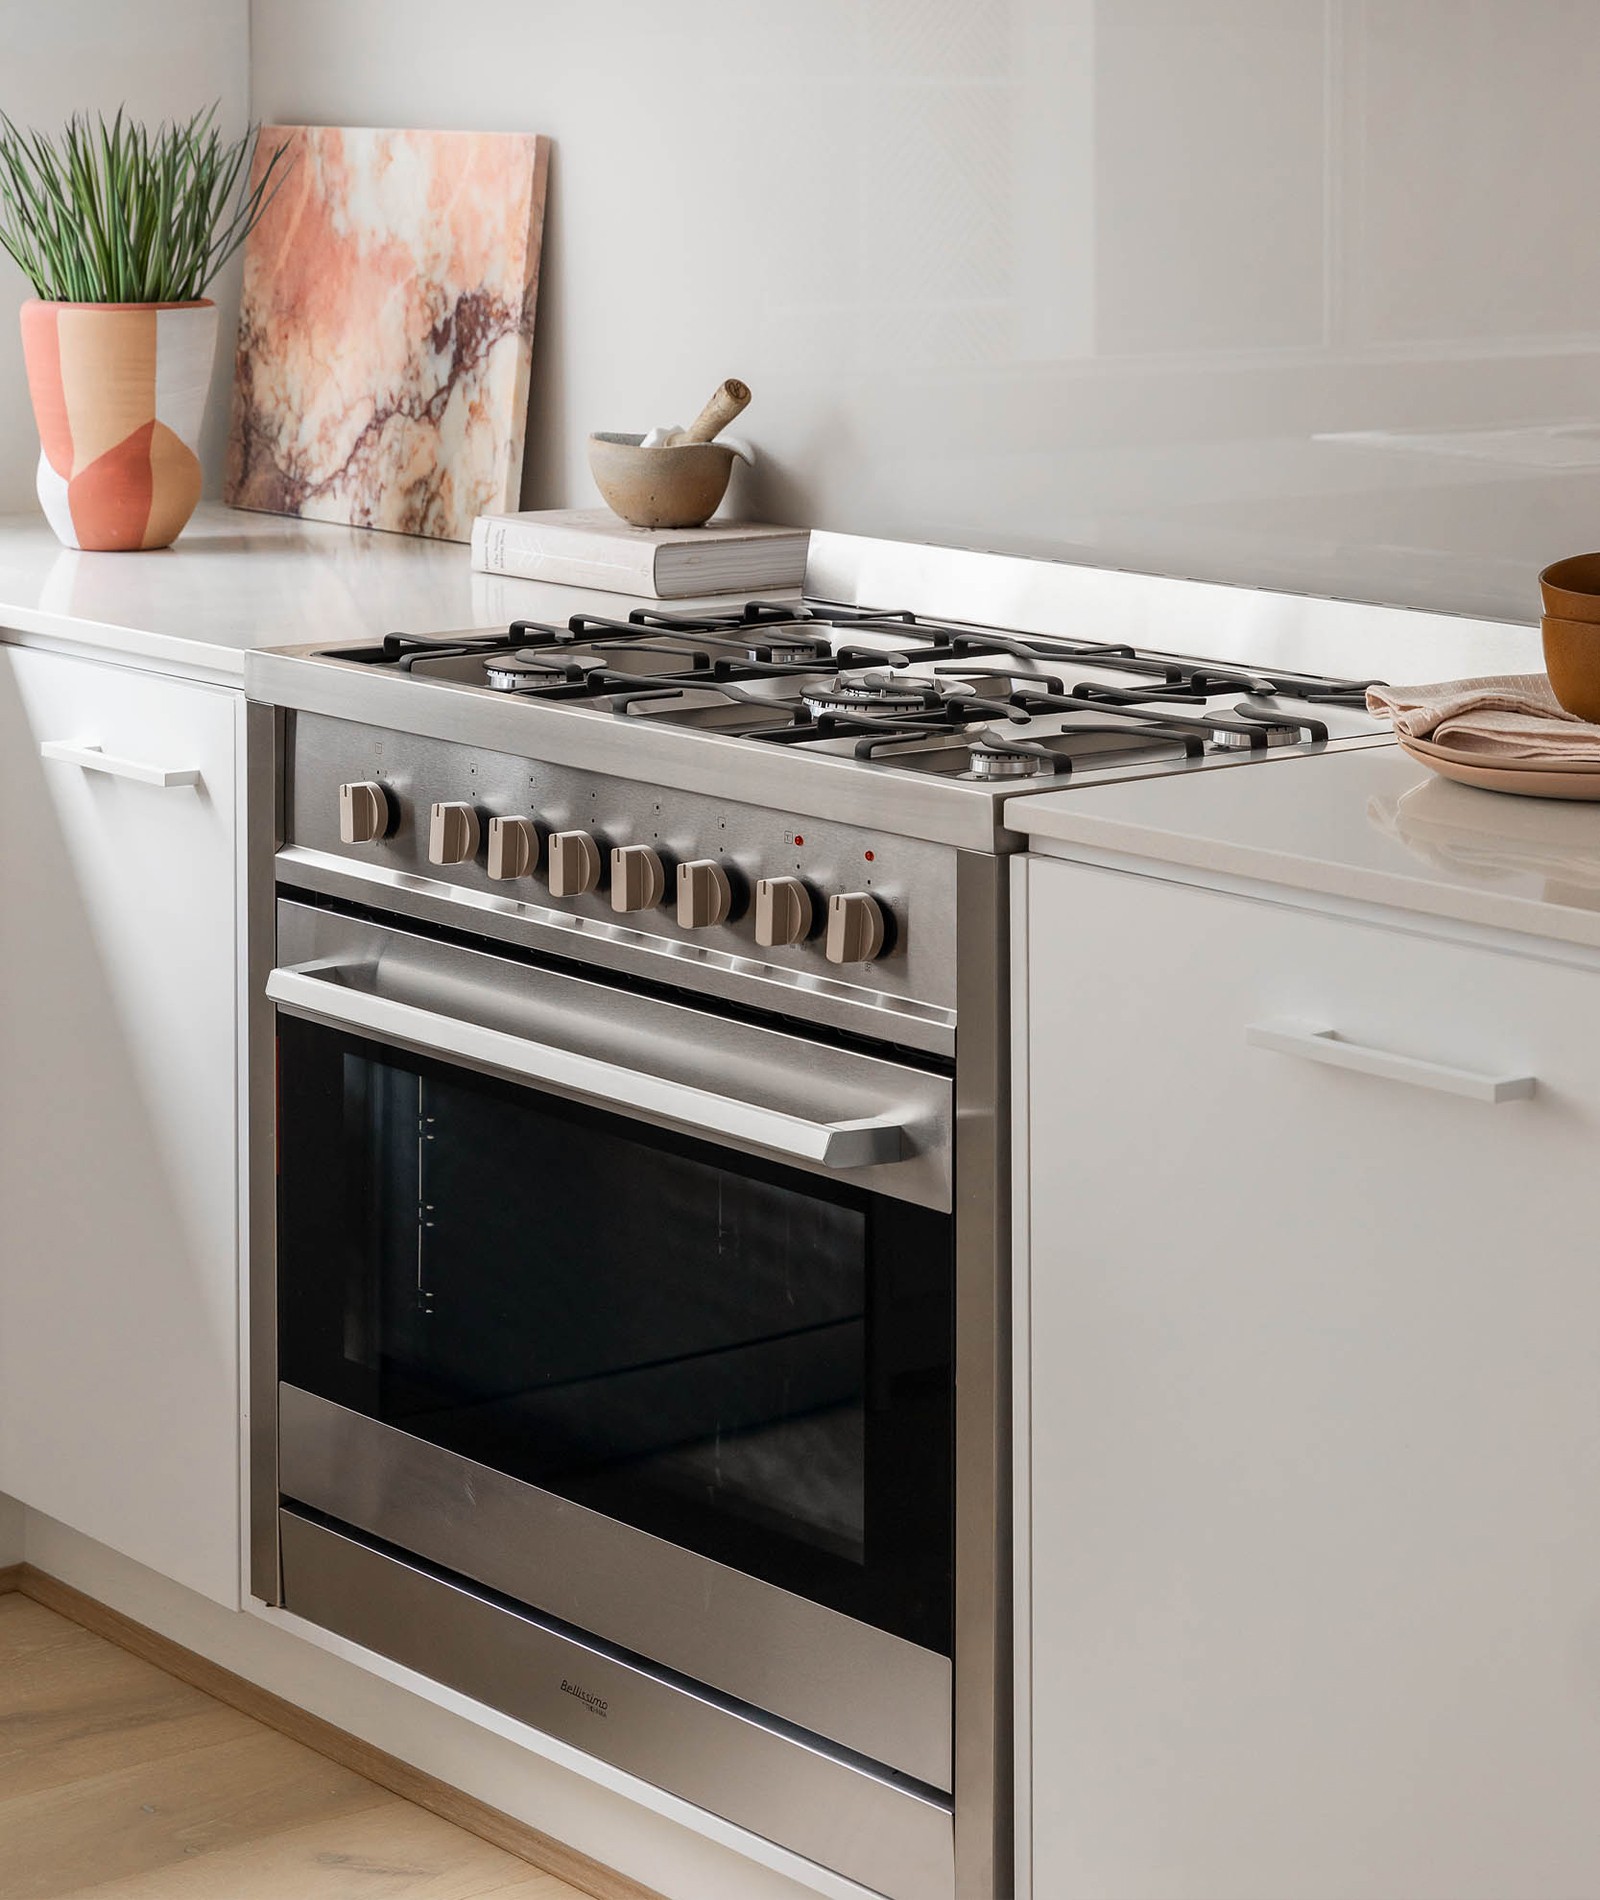 What’s Hot in Kitchens: Freestanding Range Cookers